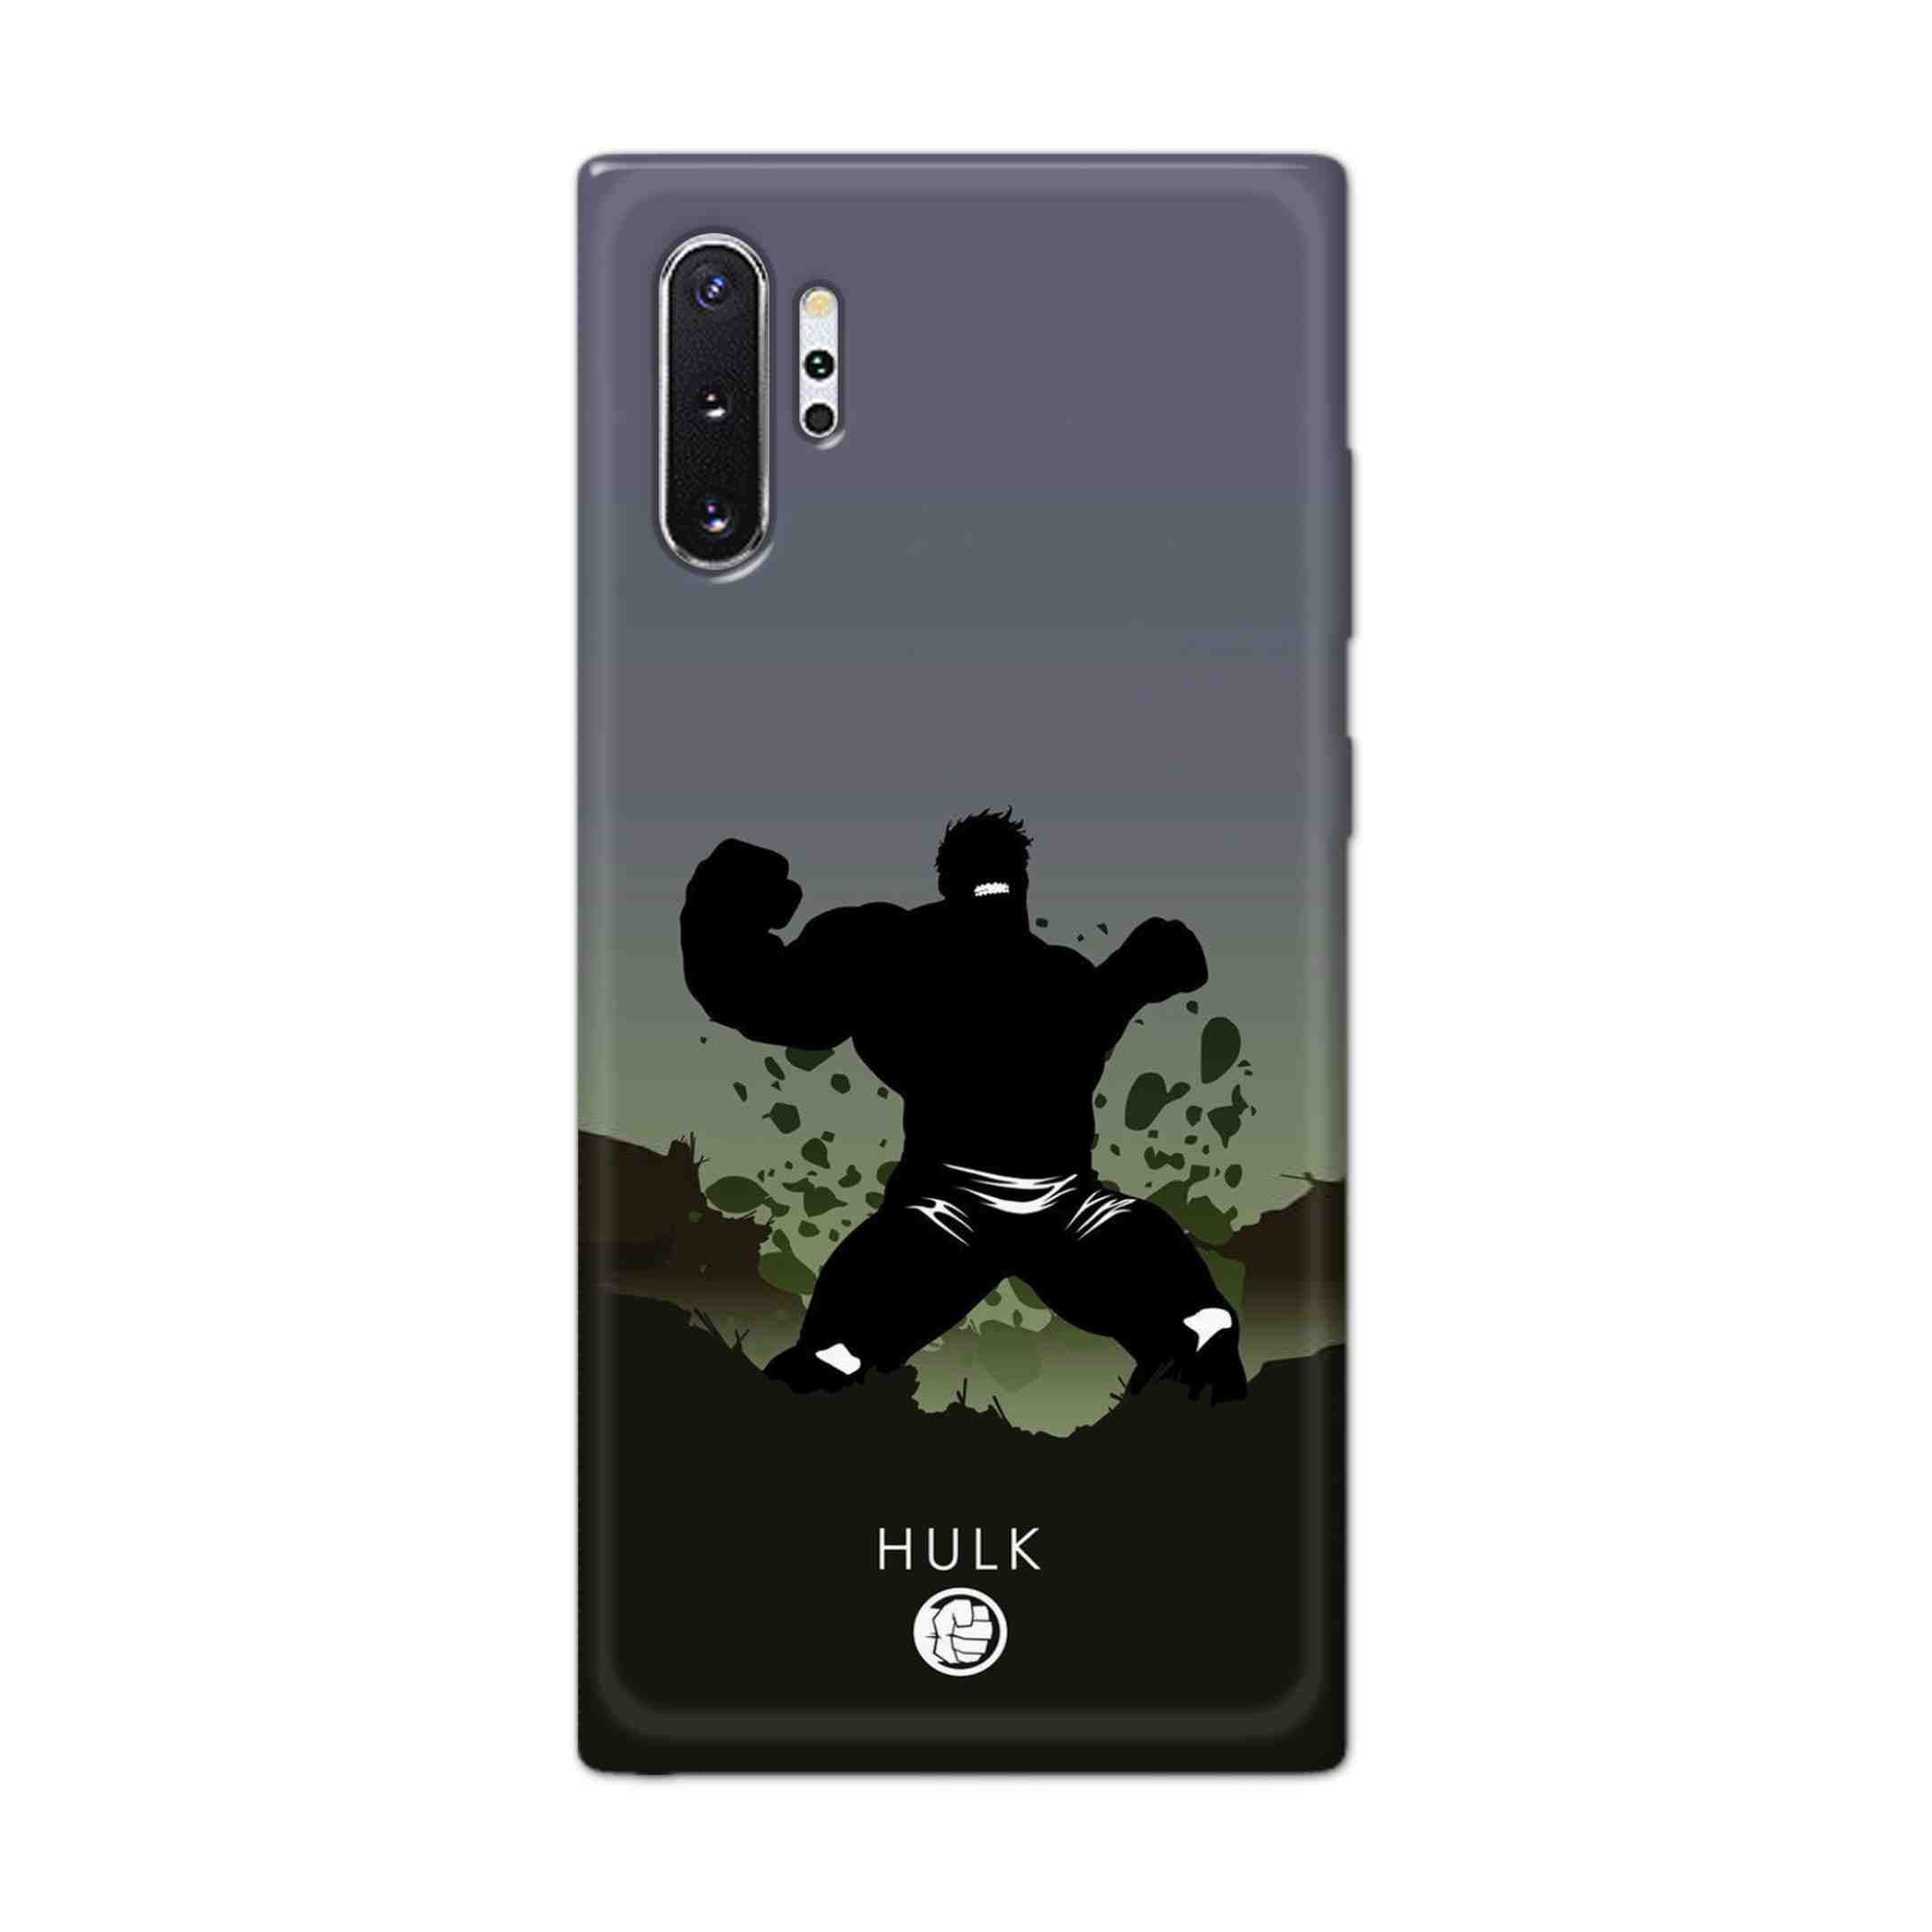 Buy Hulk Drax Hard Back Mobile Phone Case Cover For Samsung Note 10 Plus (5G) Online